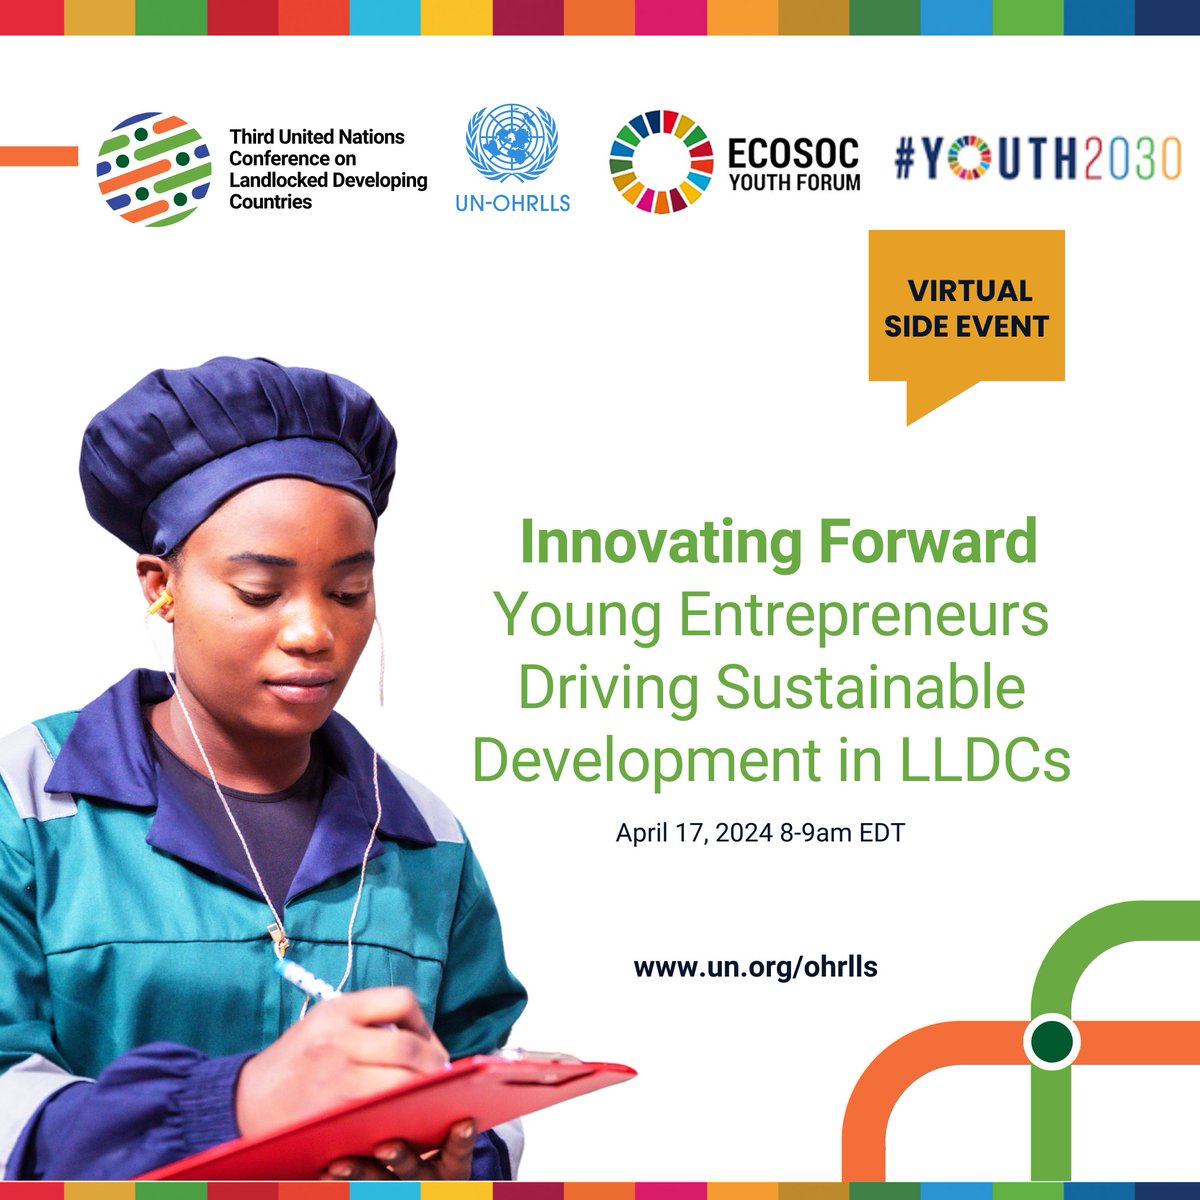 Alongside this year's @UNECOSOC #Youth2030 Forum, join @UNOHRLLS for a side event focusing on the critical role of young entrepreneurs in transforming #LLDCs through sustainable innovation 🙌 🗓️ 17 April ⏰ 8-9 AM EDT 🔗 forms.office.com/e/AGqLKjRg1a